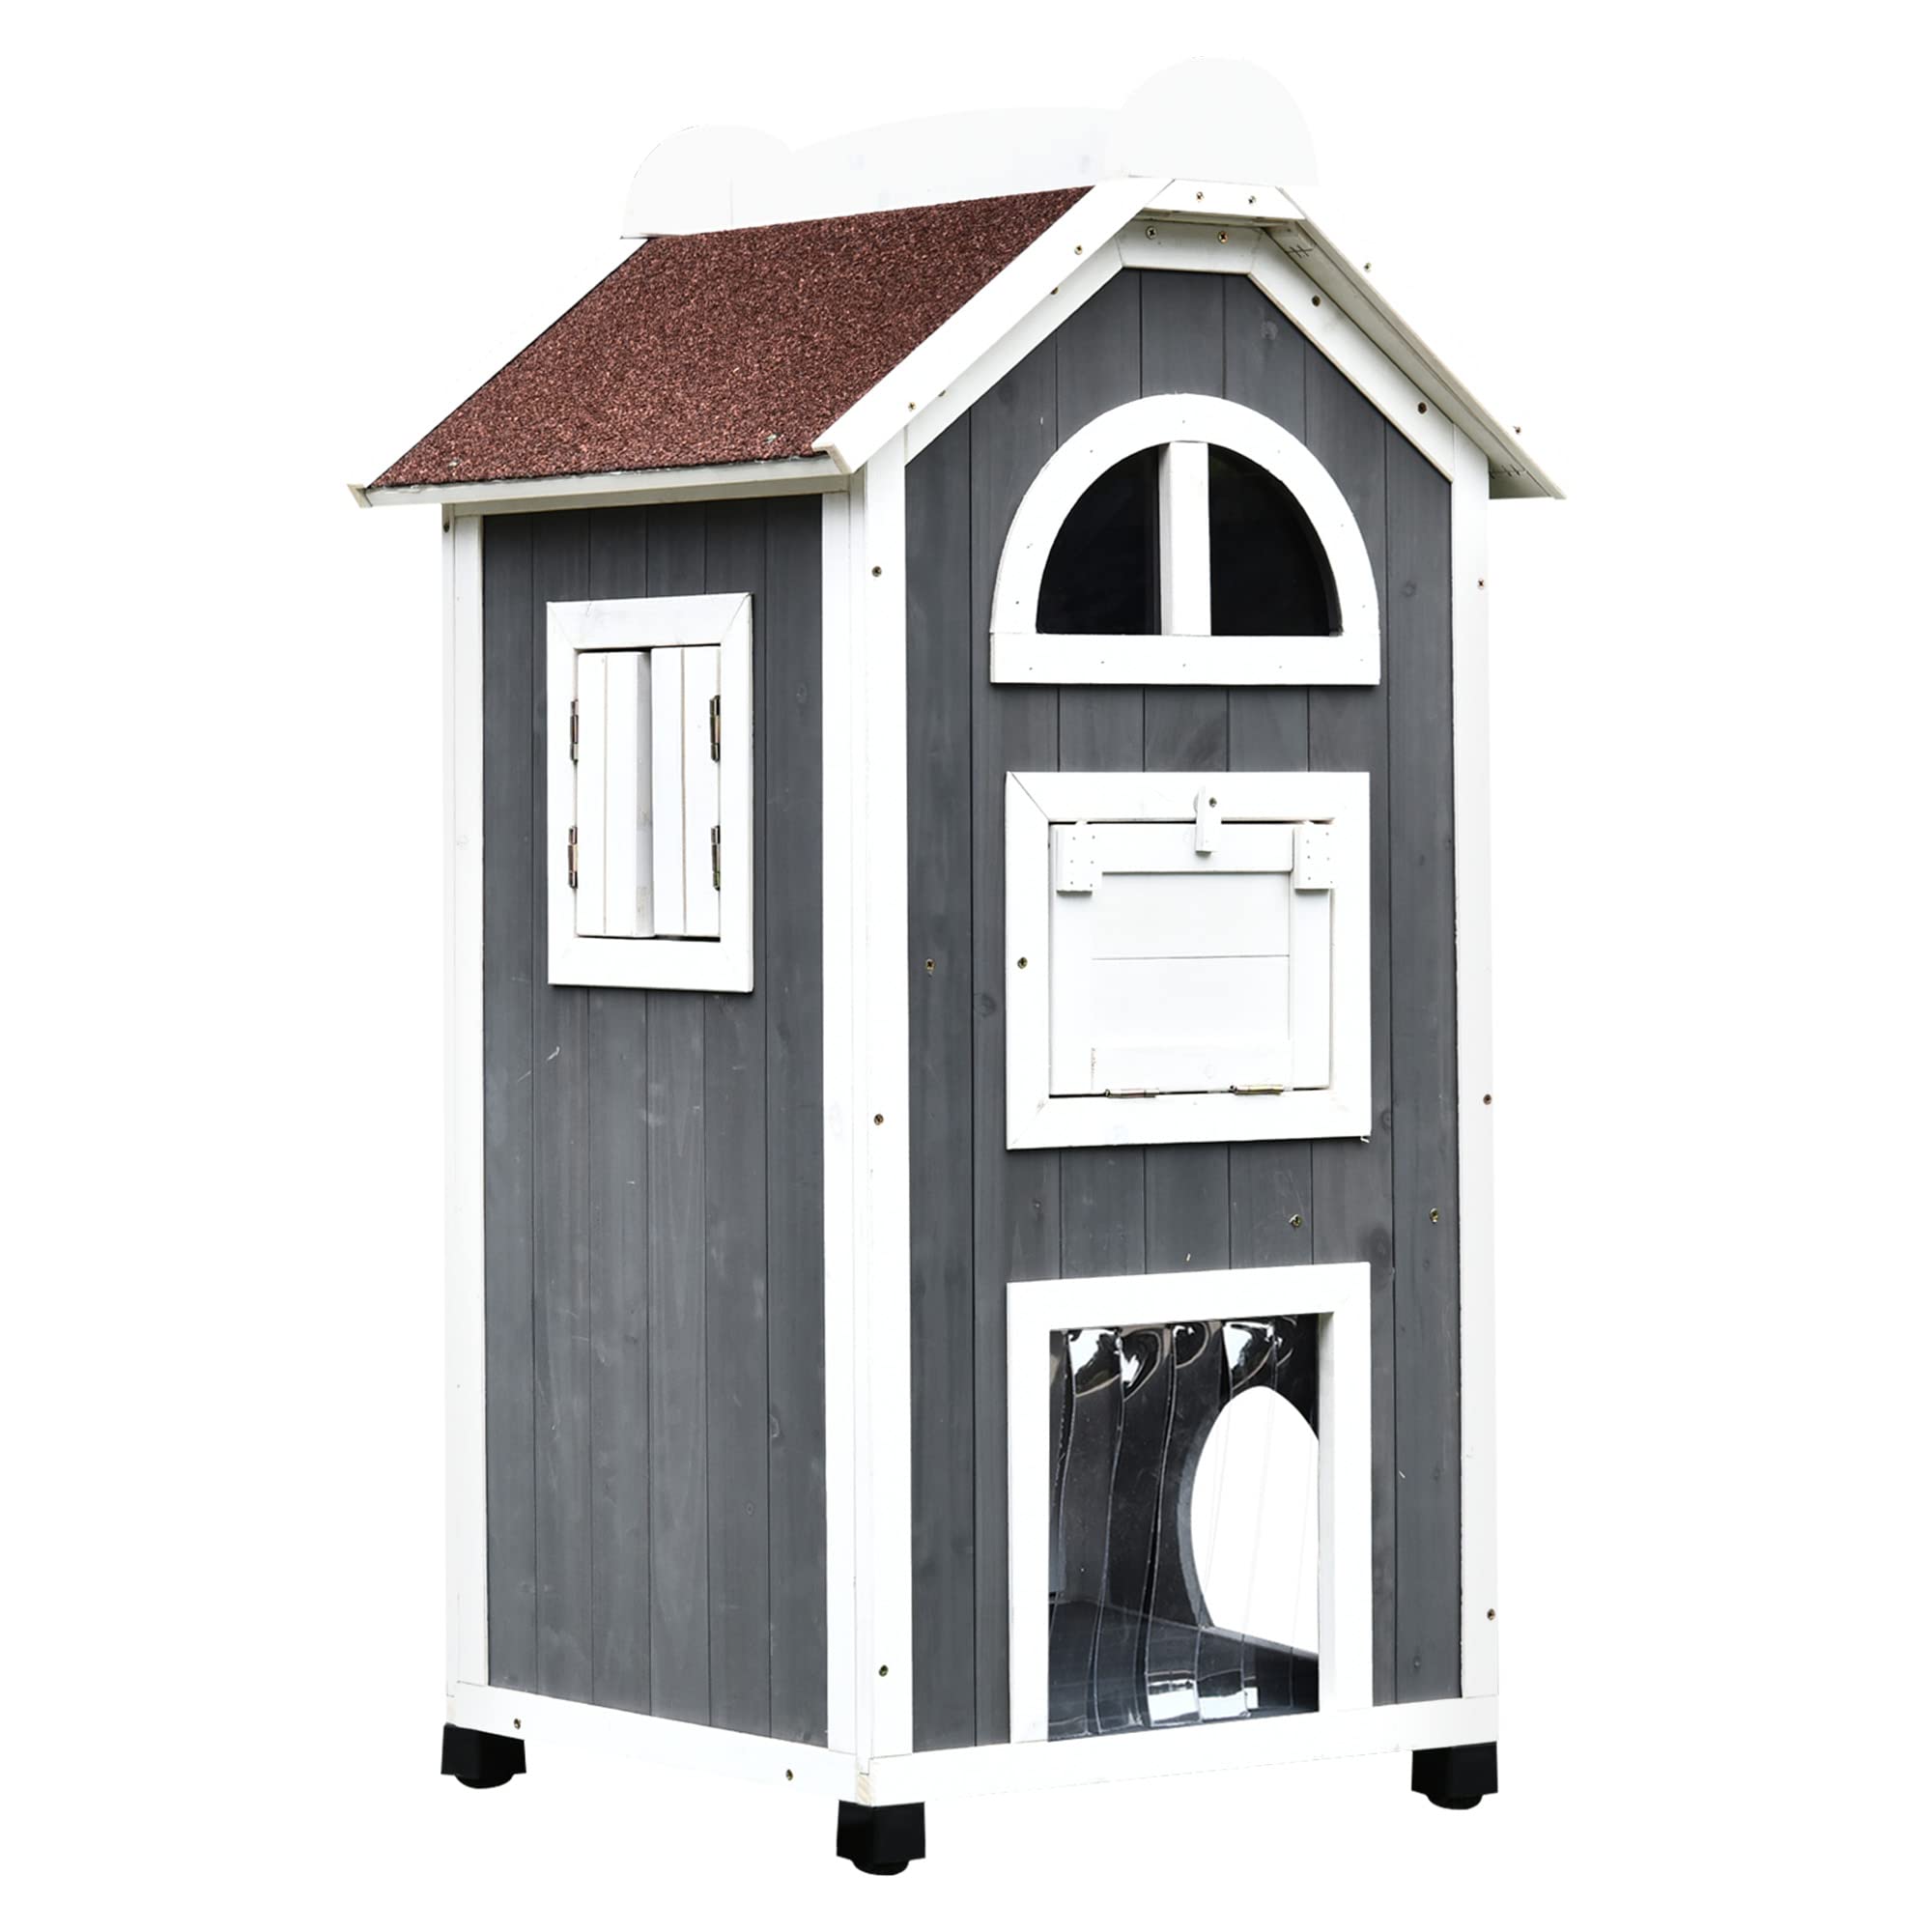 PawHut 43" H Wooden Cat House Outdoor with Hammock, Weatherproof 3-Floor Feral Cat Shelter with Escape Doors, Asphalt Roof, Inside Ladders, Gray